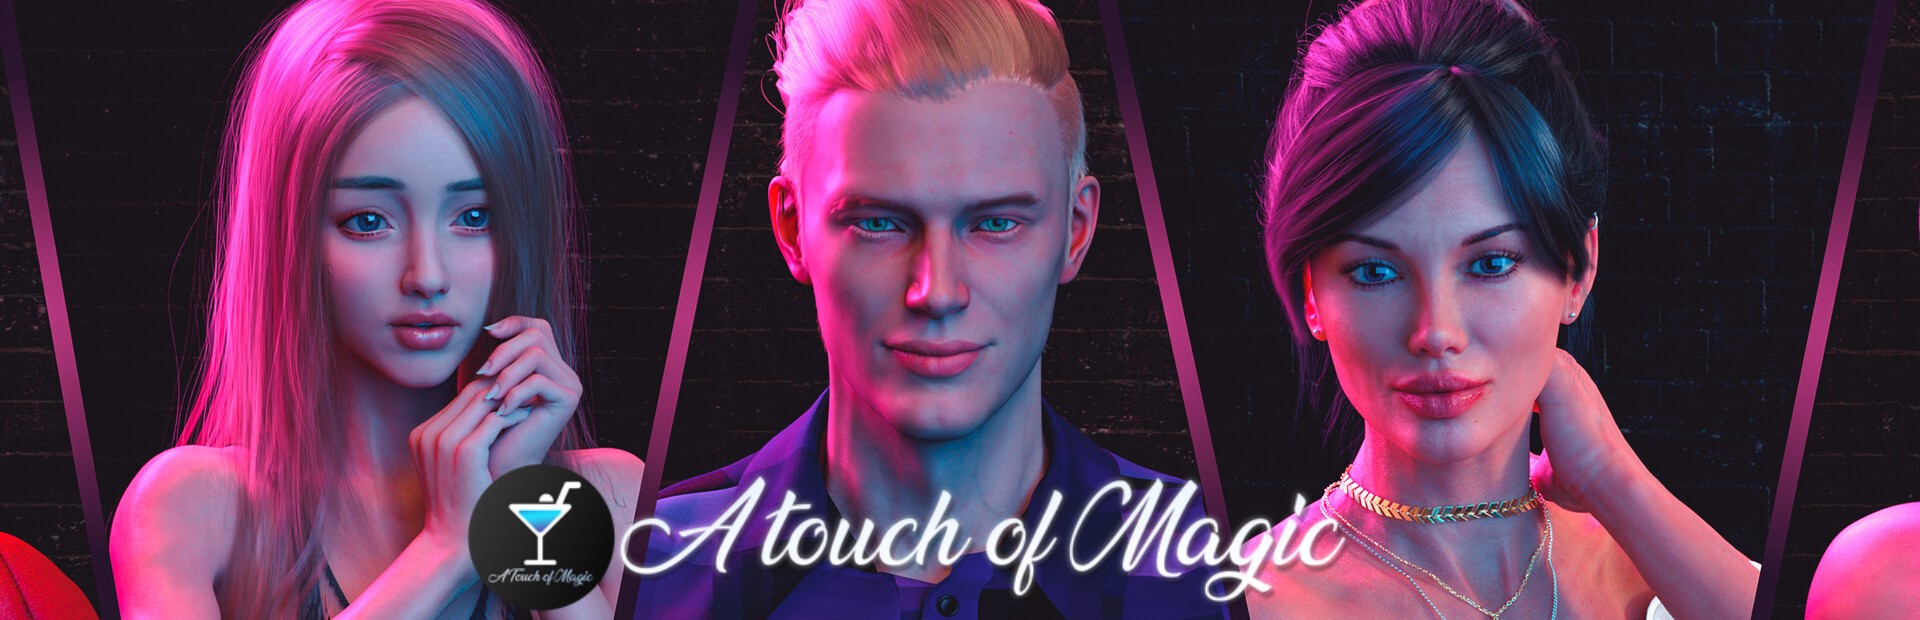 A Touch of Magic poster